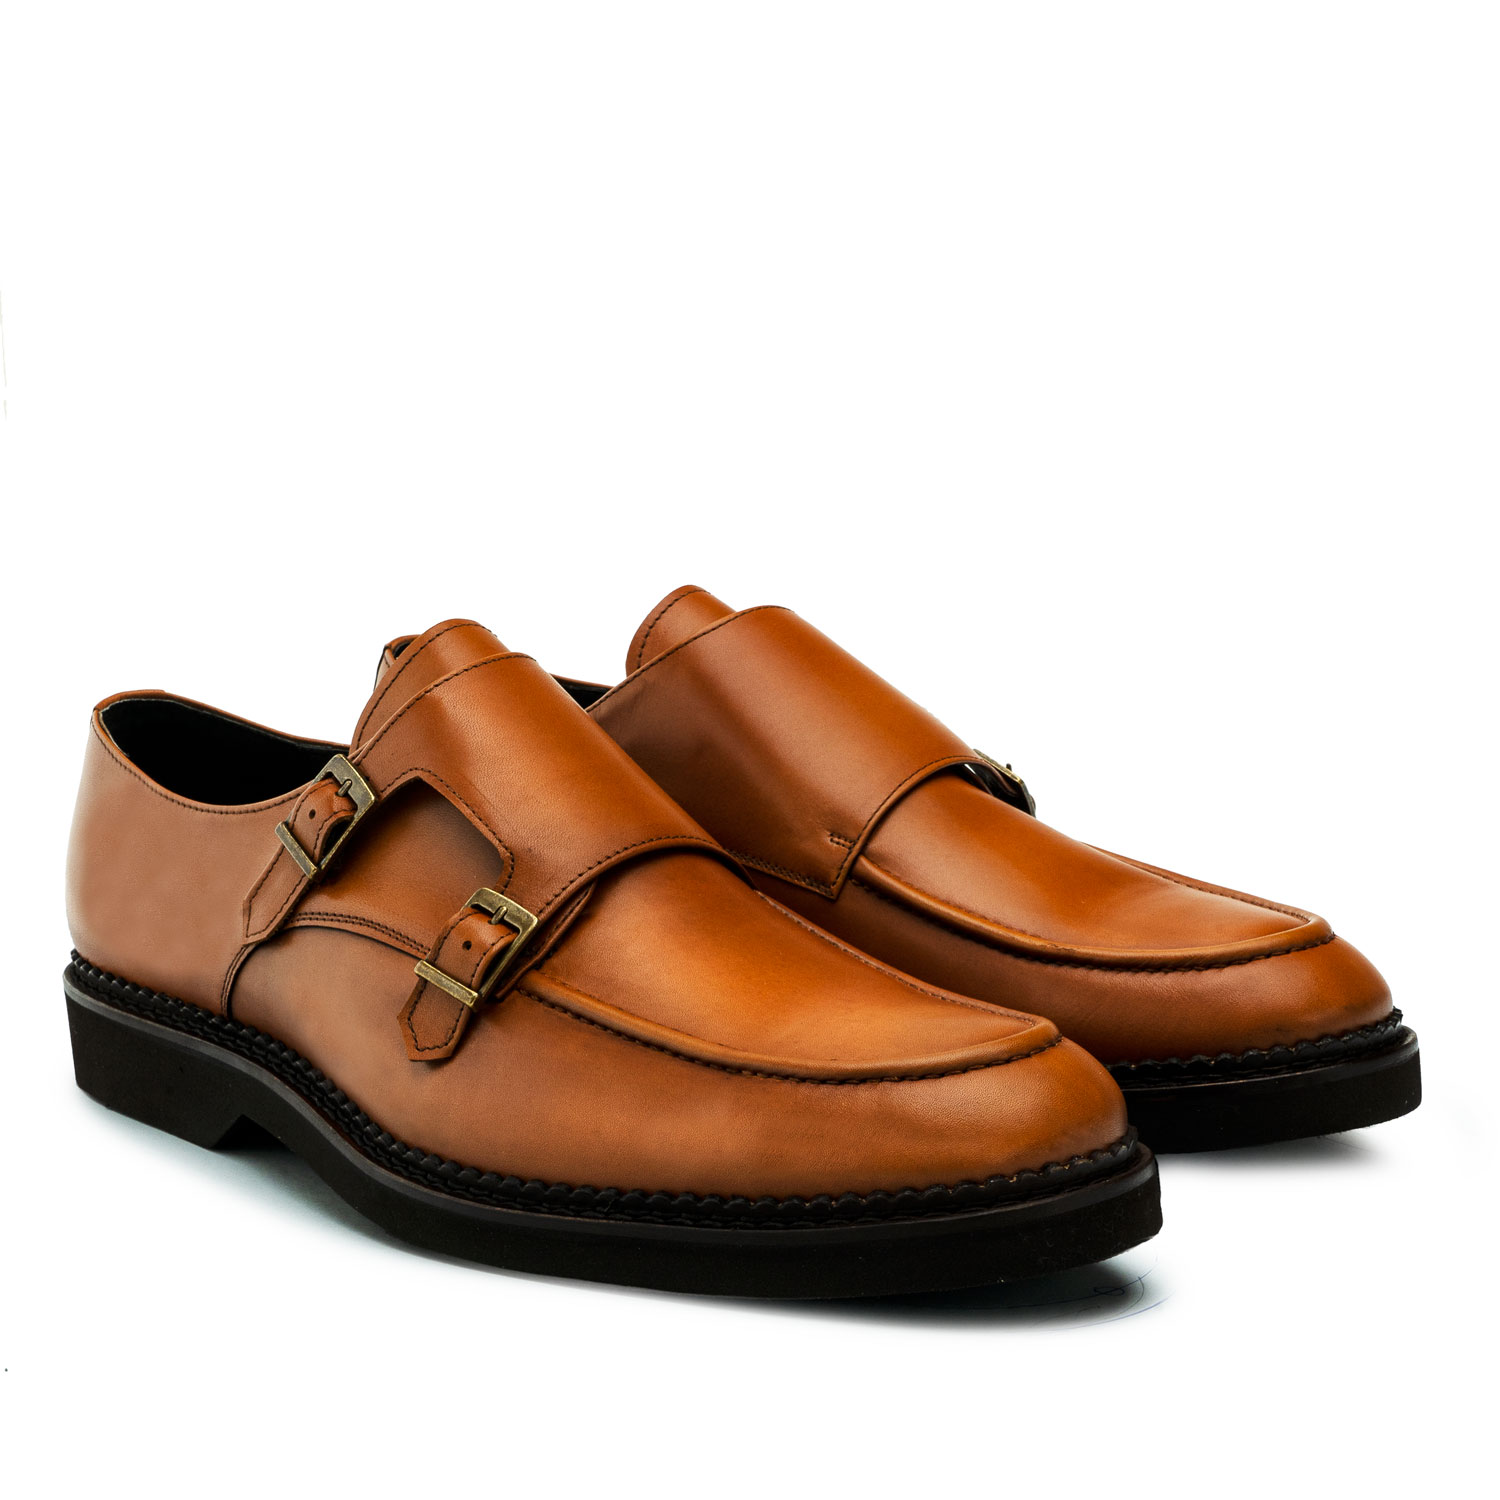 Monkstrap Shoes in Brown Leather 